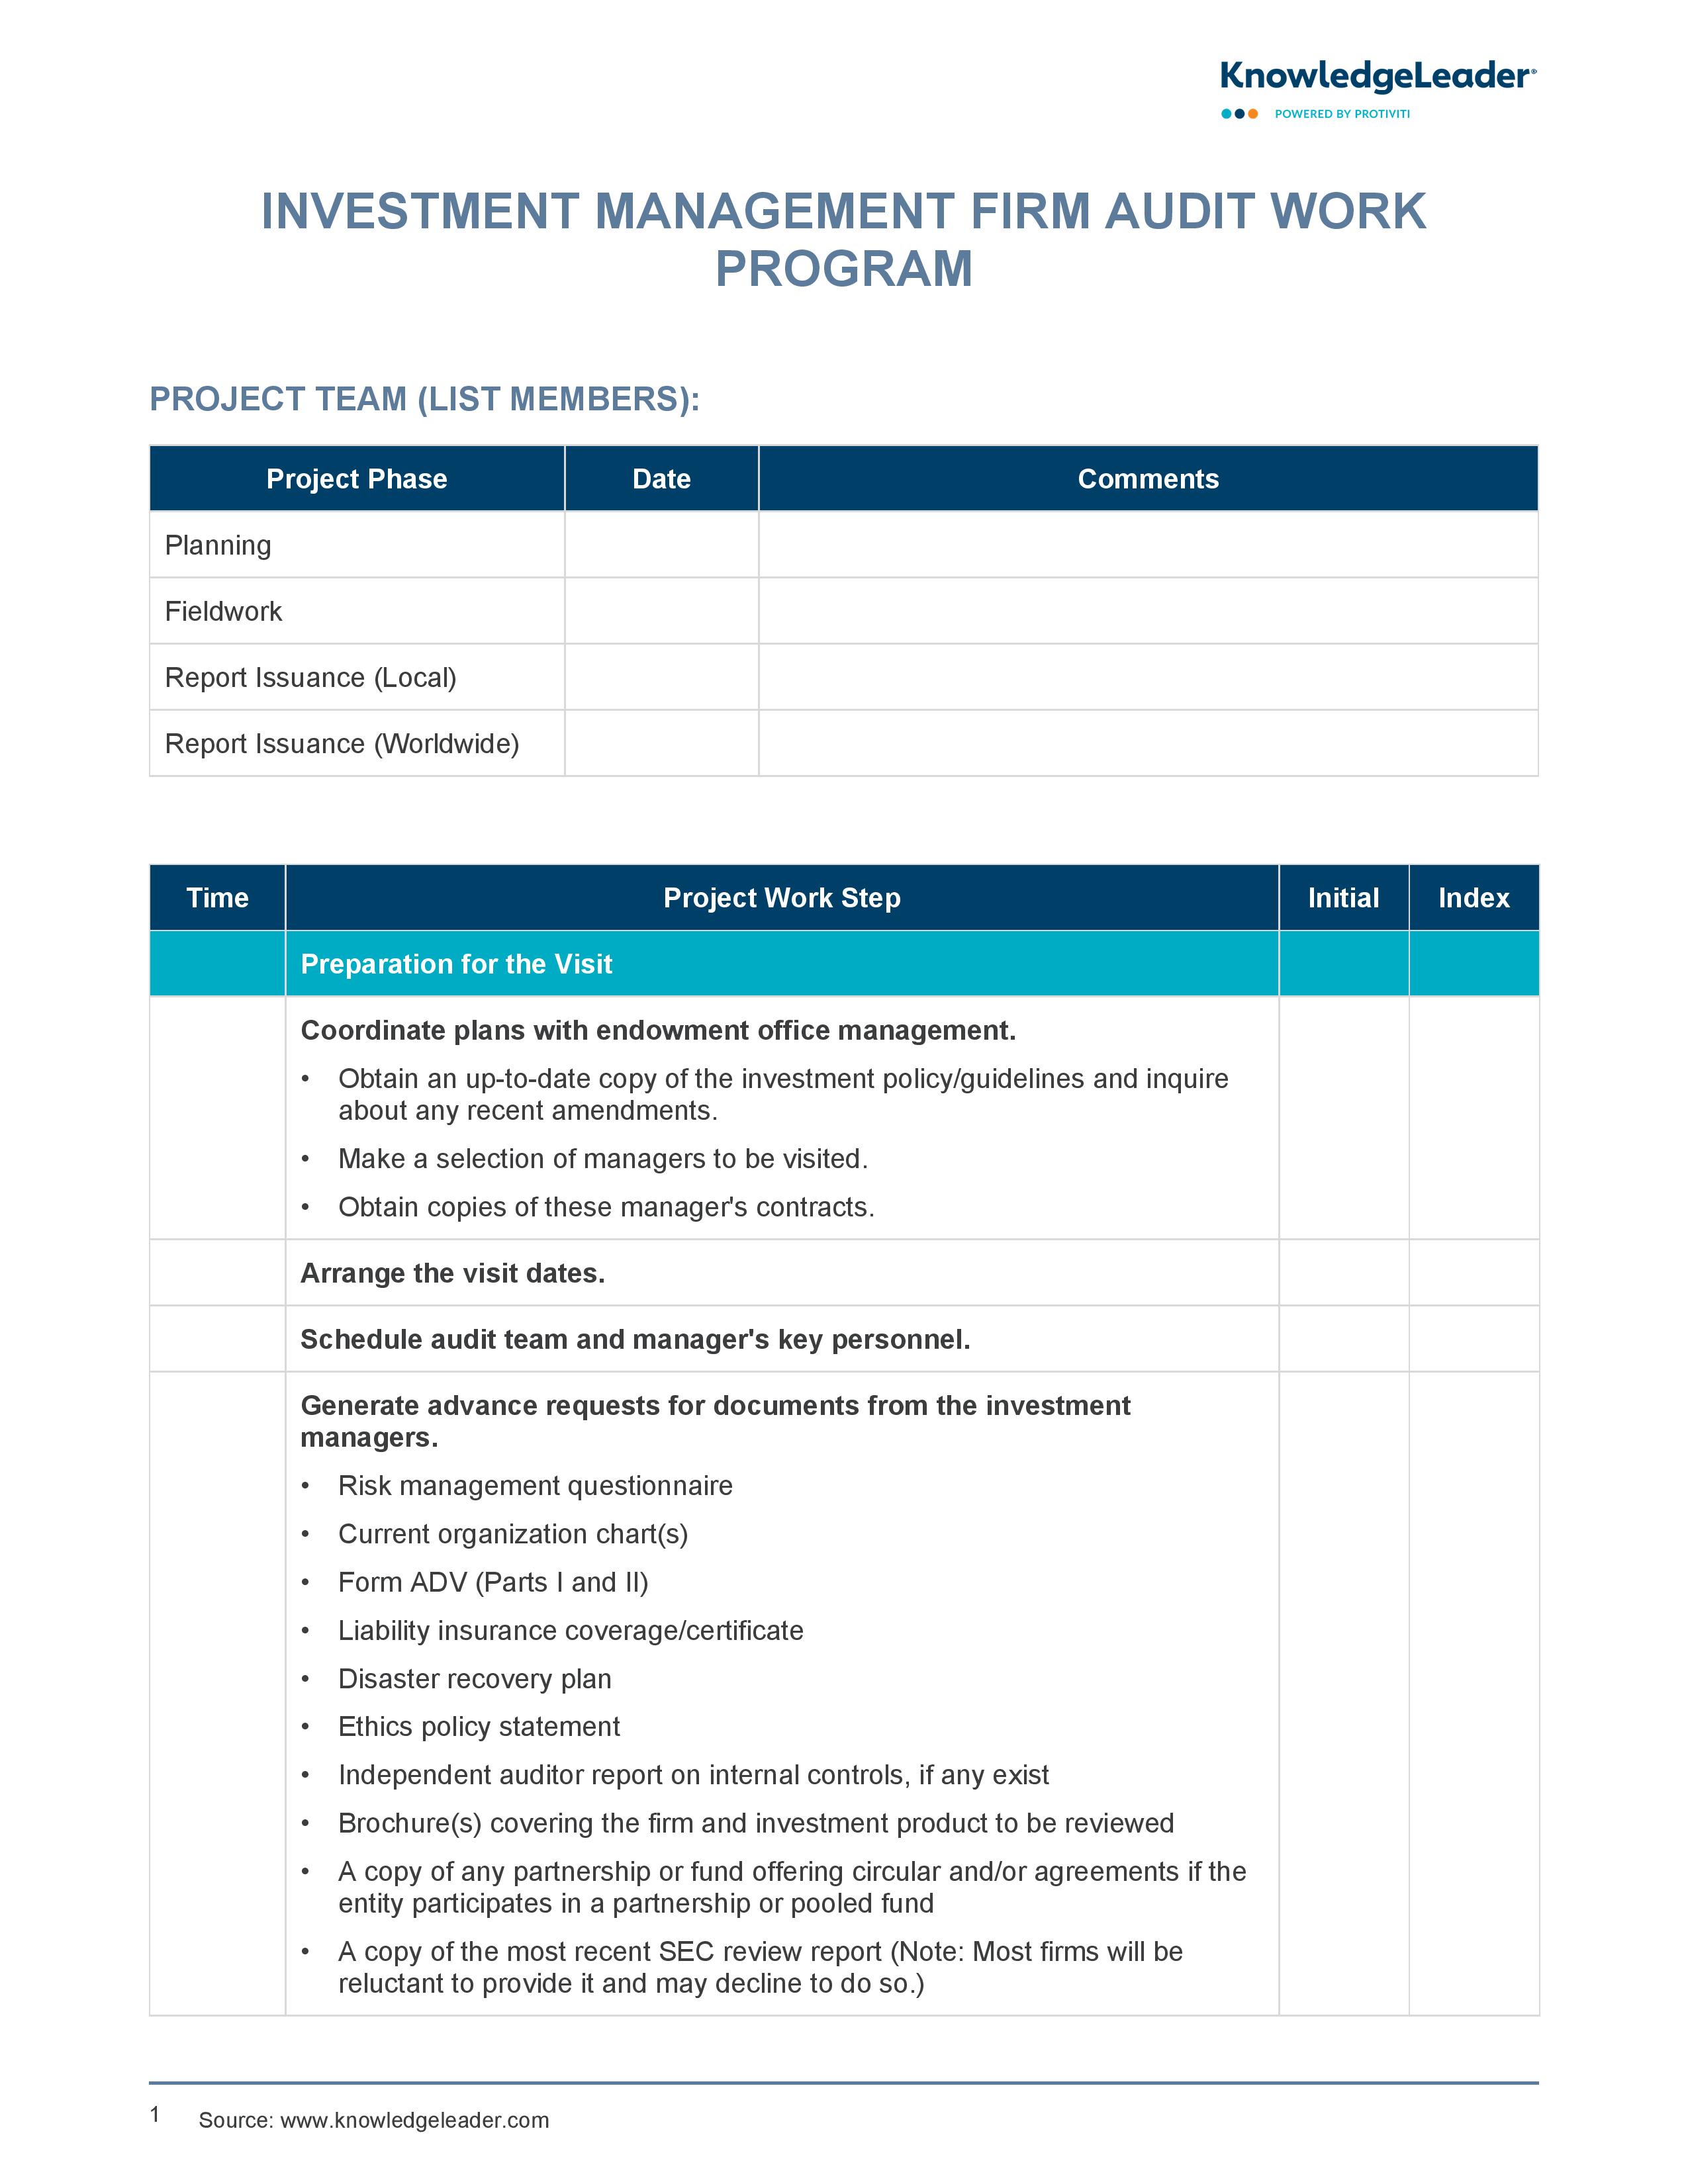 screenshot of the first page of Investment Management Firm Audit Work Program